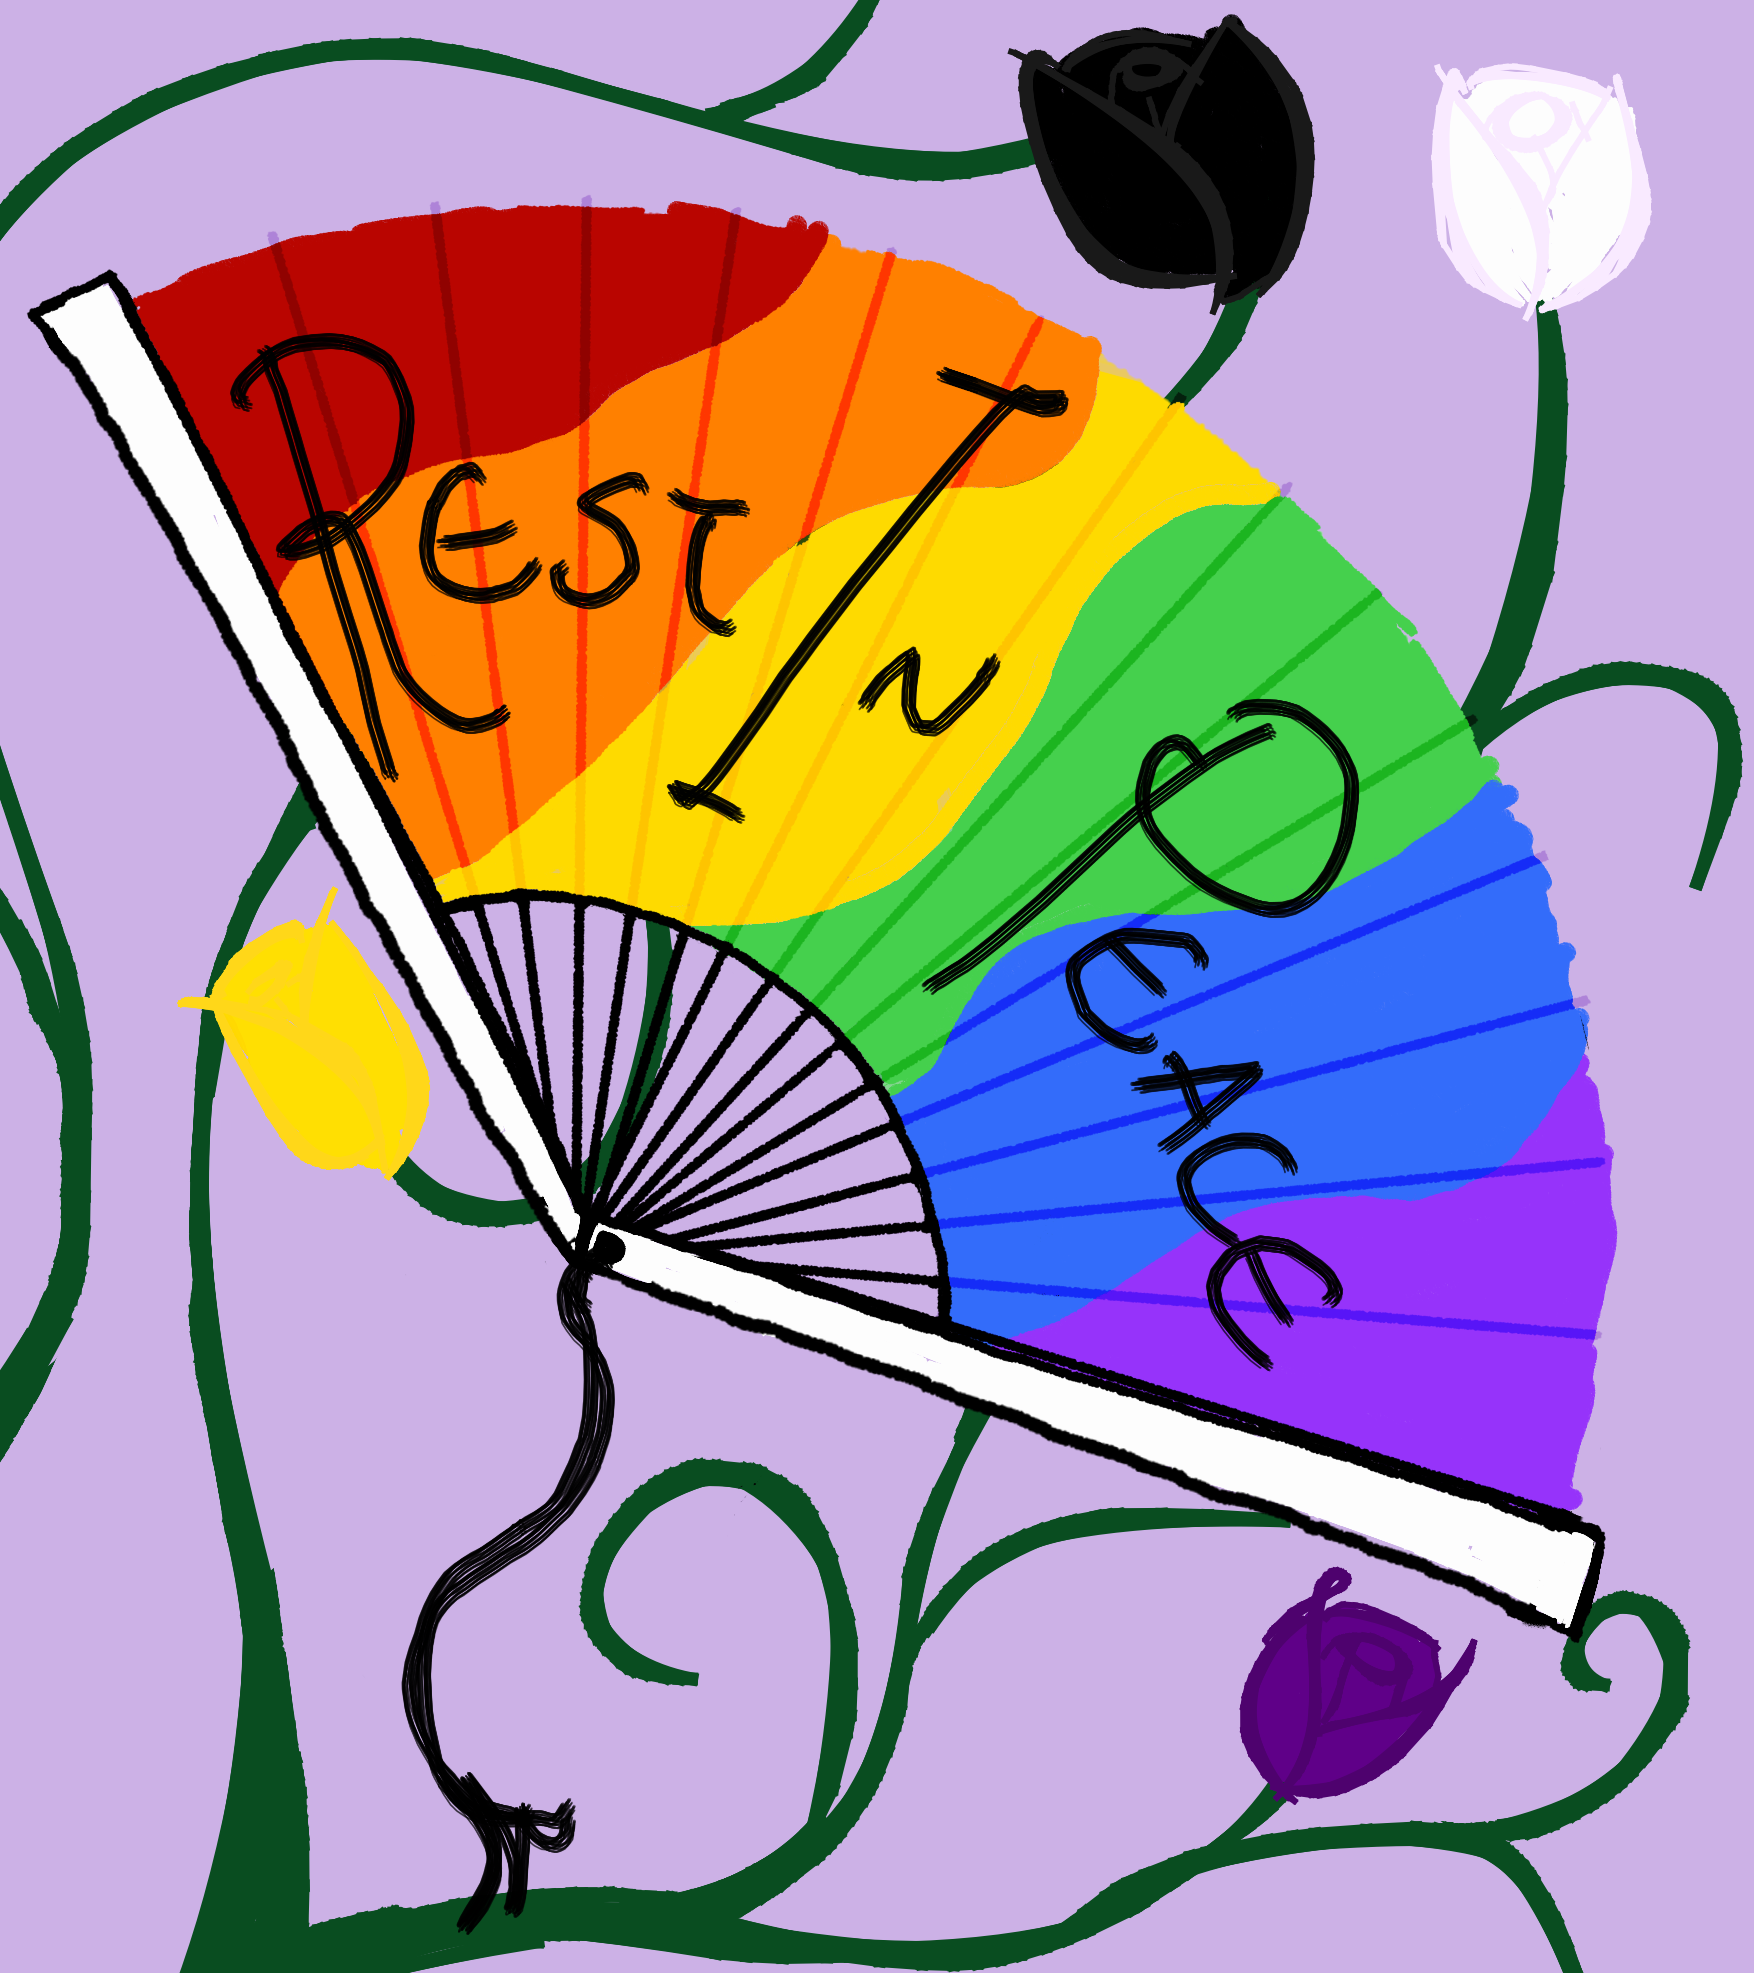 A digital illustration of a rainbow folding fan which reads "Rest In Peace." Surrounding the fan are a variety of roses in the colors of the nonbinary pride flag: black, white, yellow, and purple. The image's background is lilac.